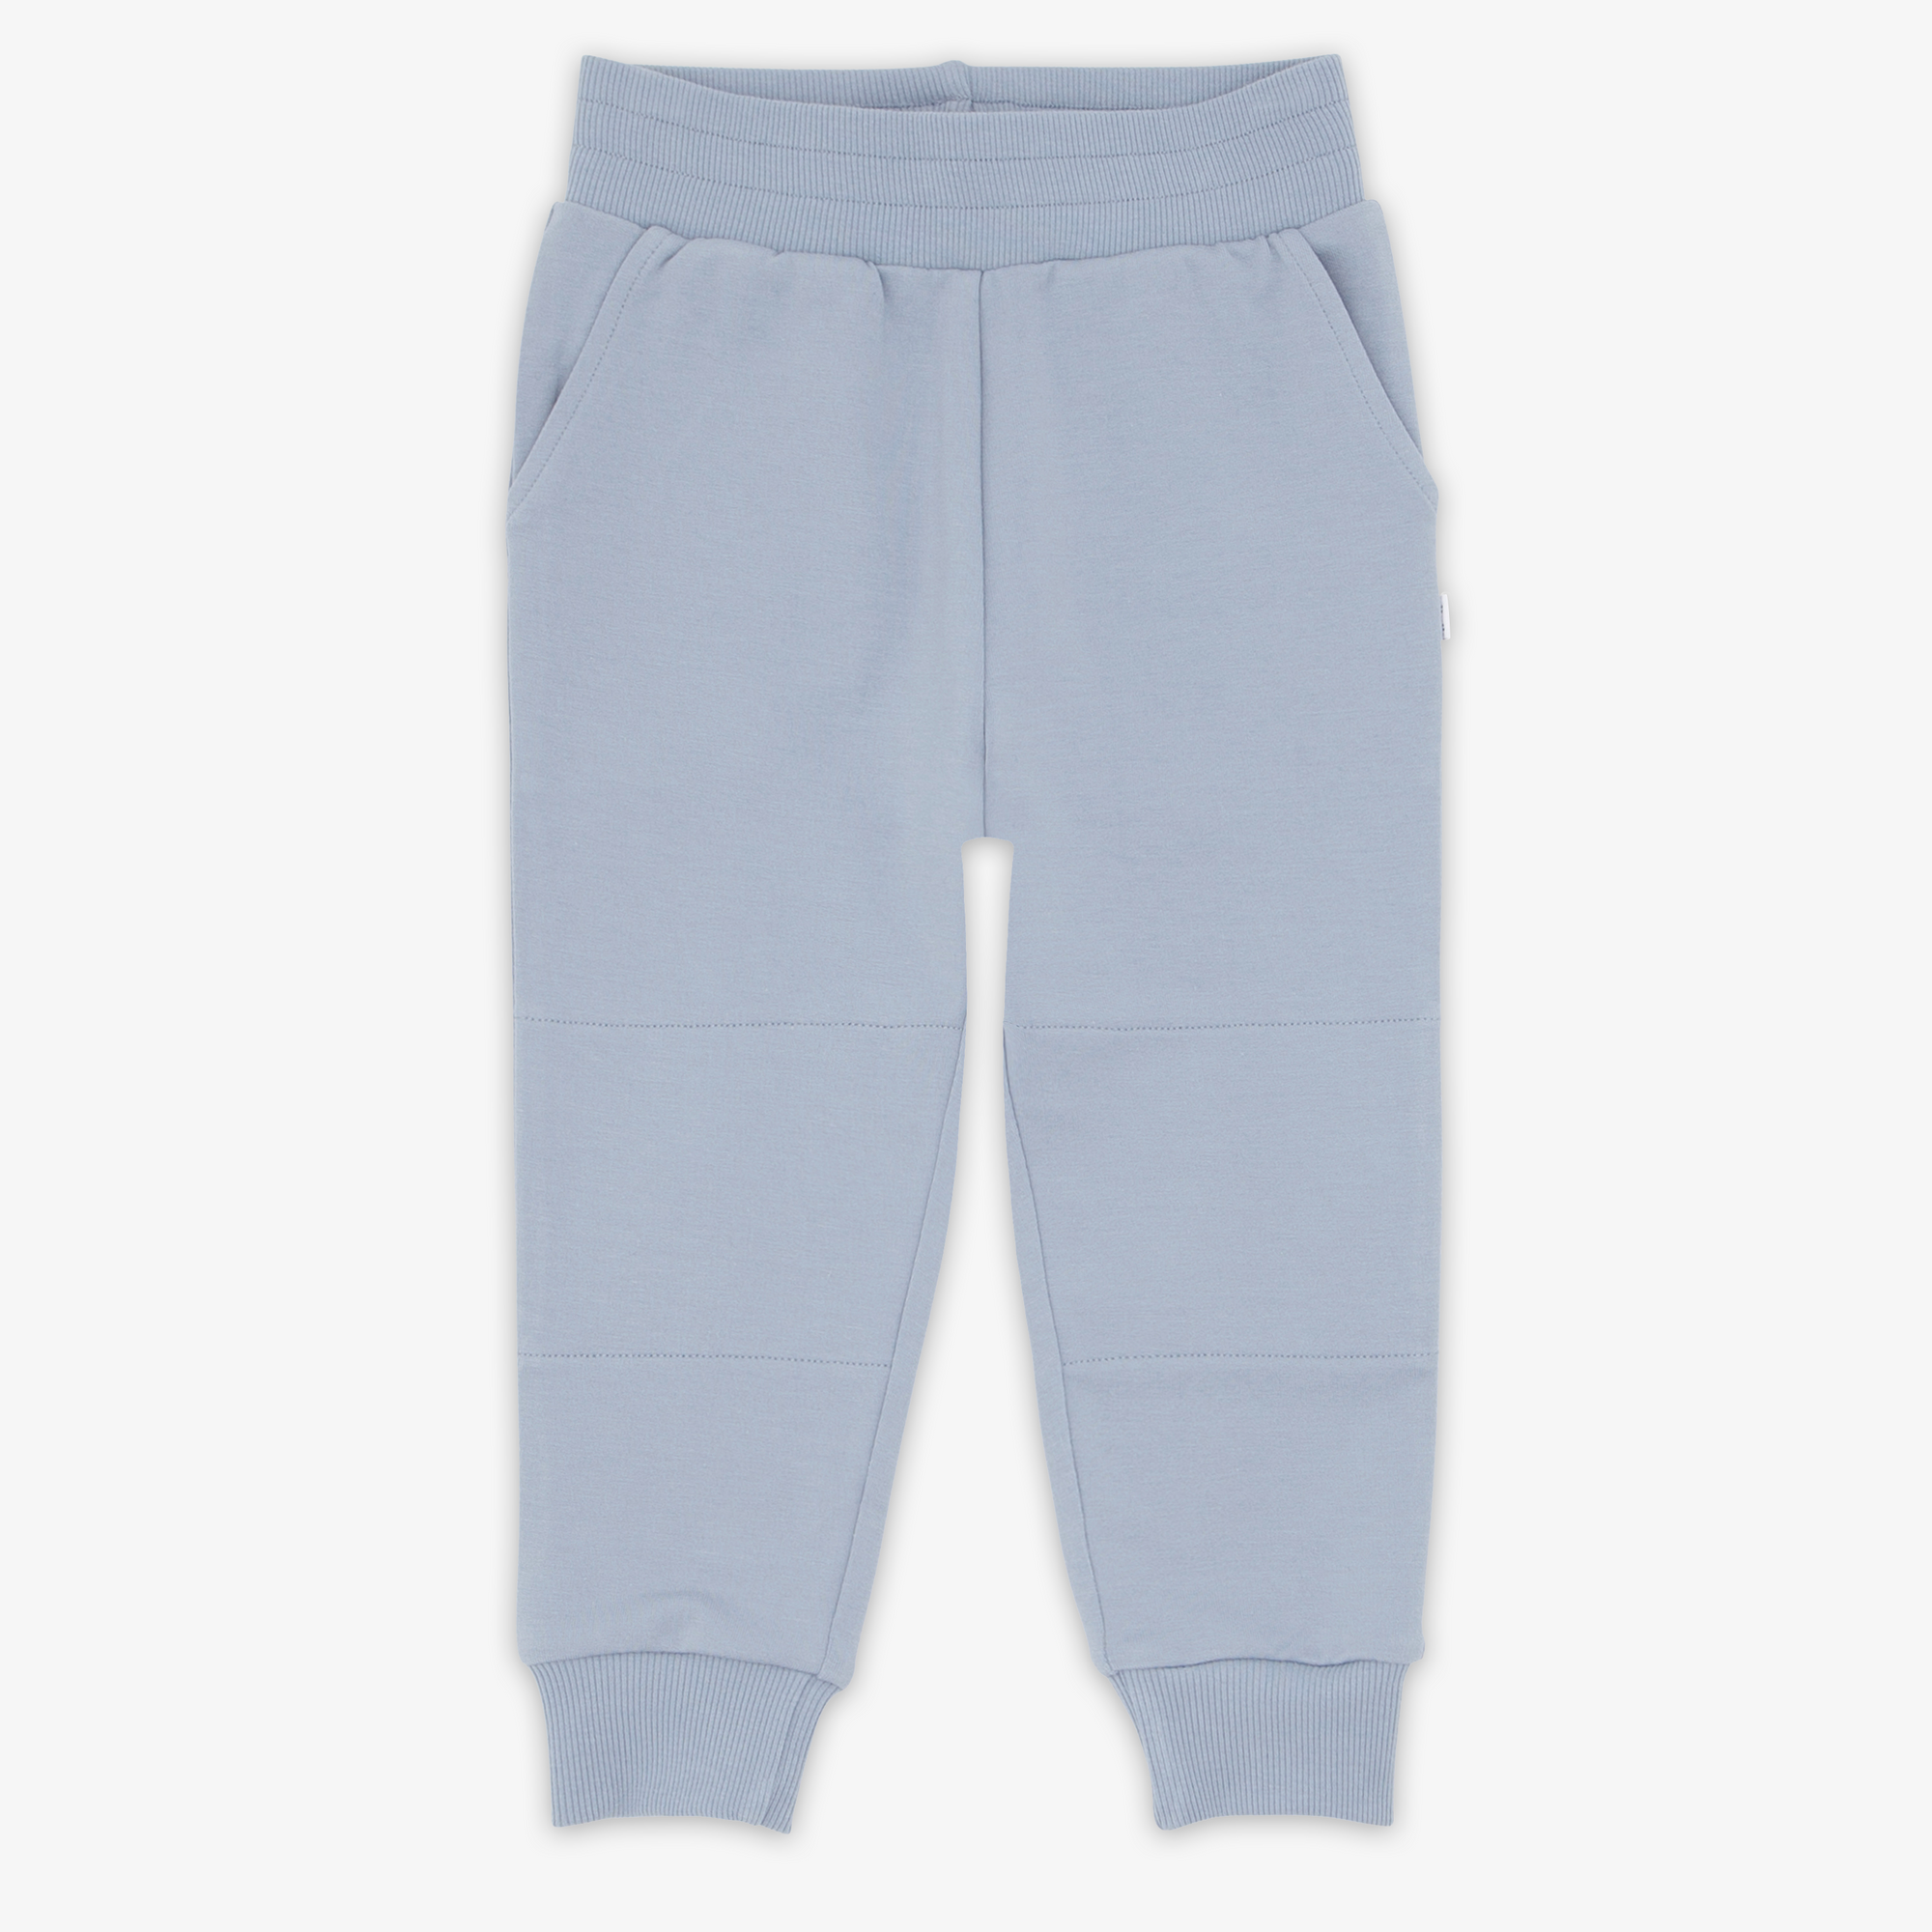 Flat lay image of the Fog Play Jogger